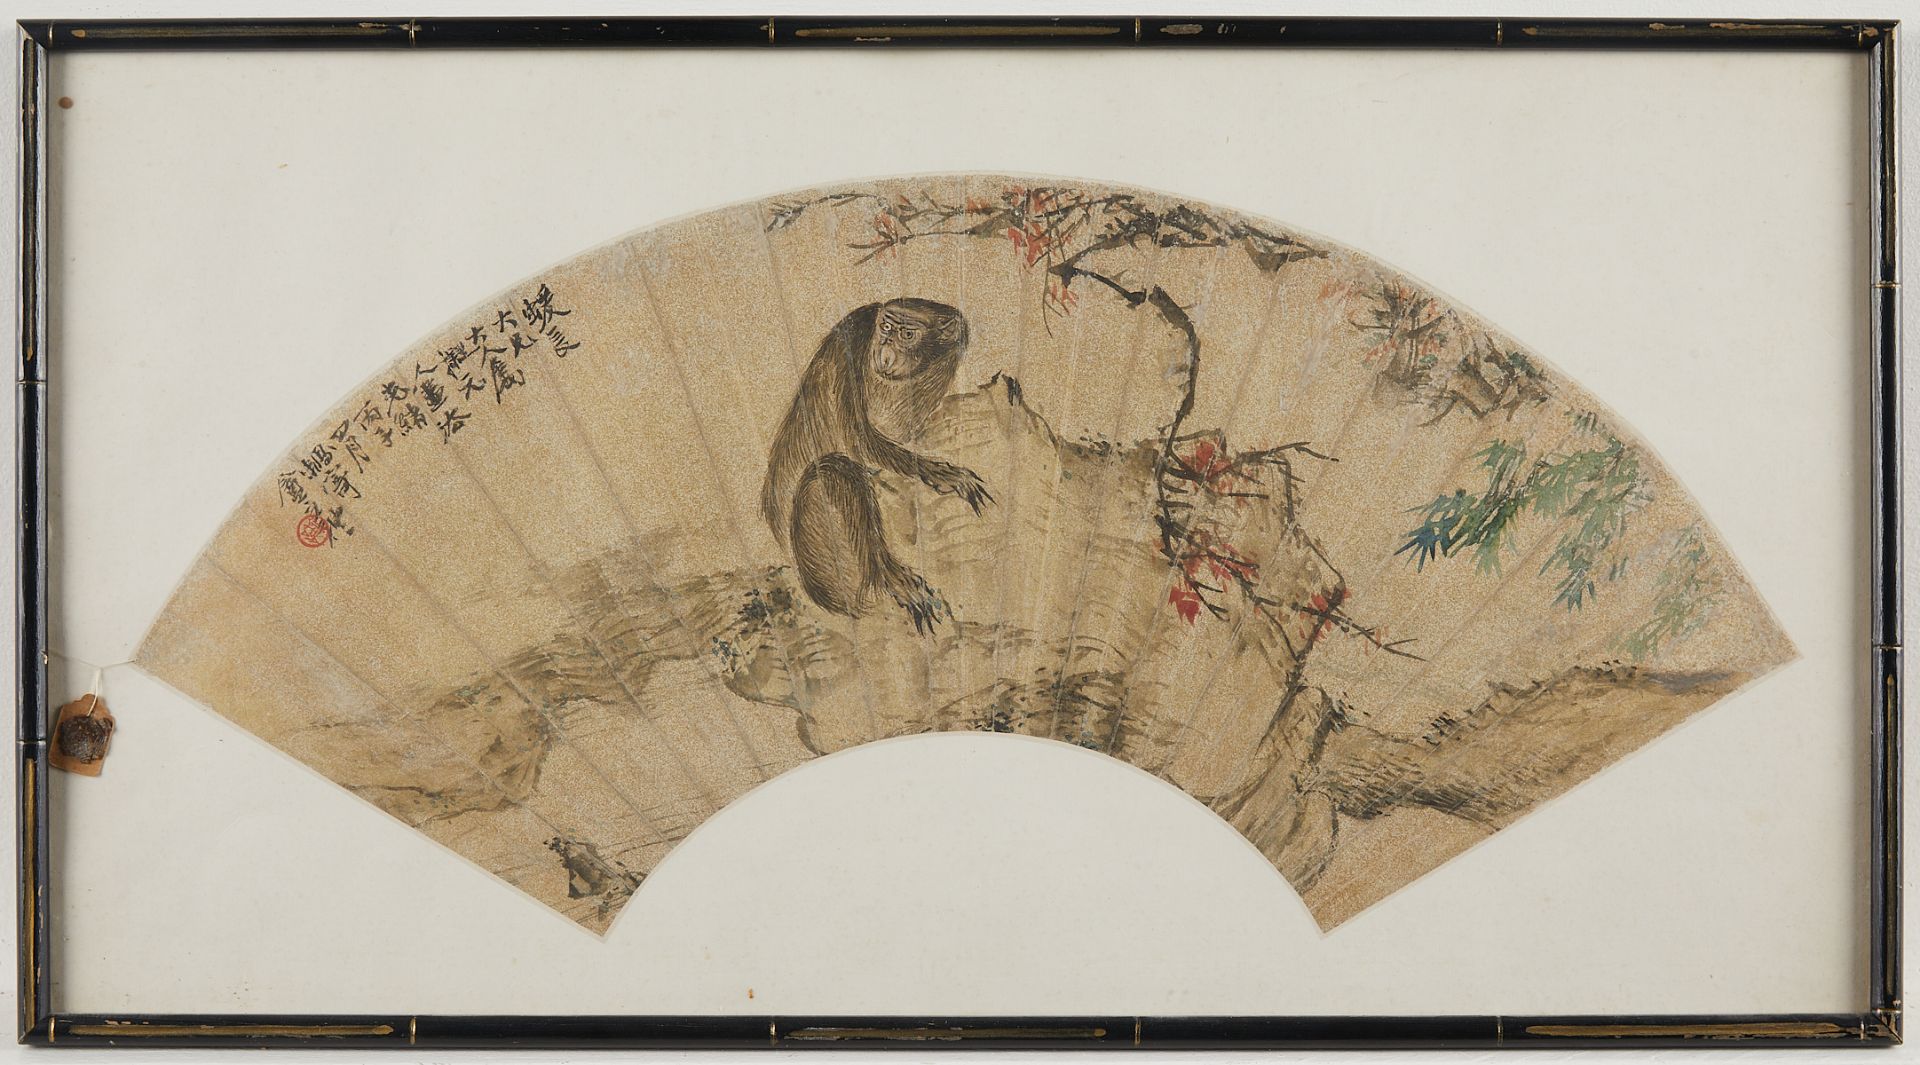 Chinese Fan Painting of Monkey - Image 3 of 6